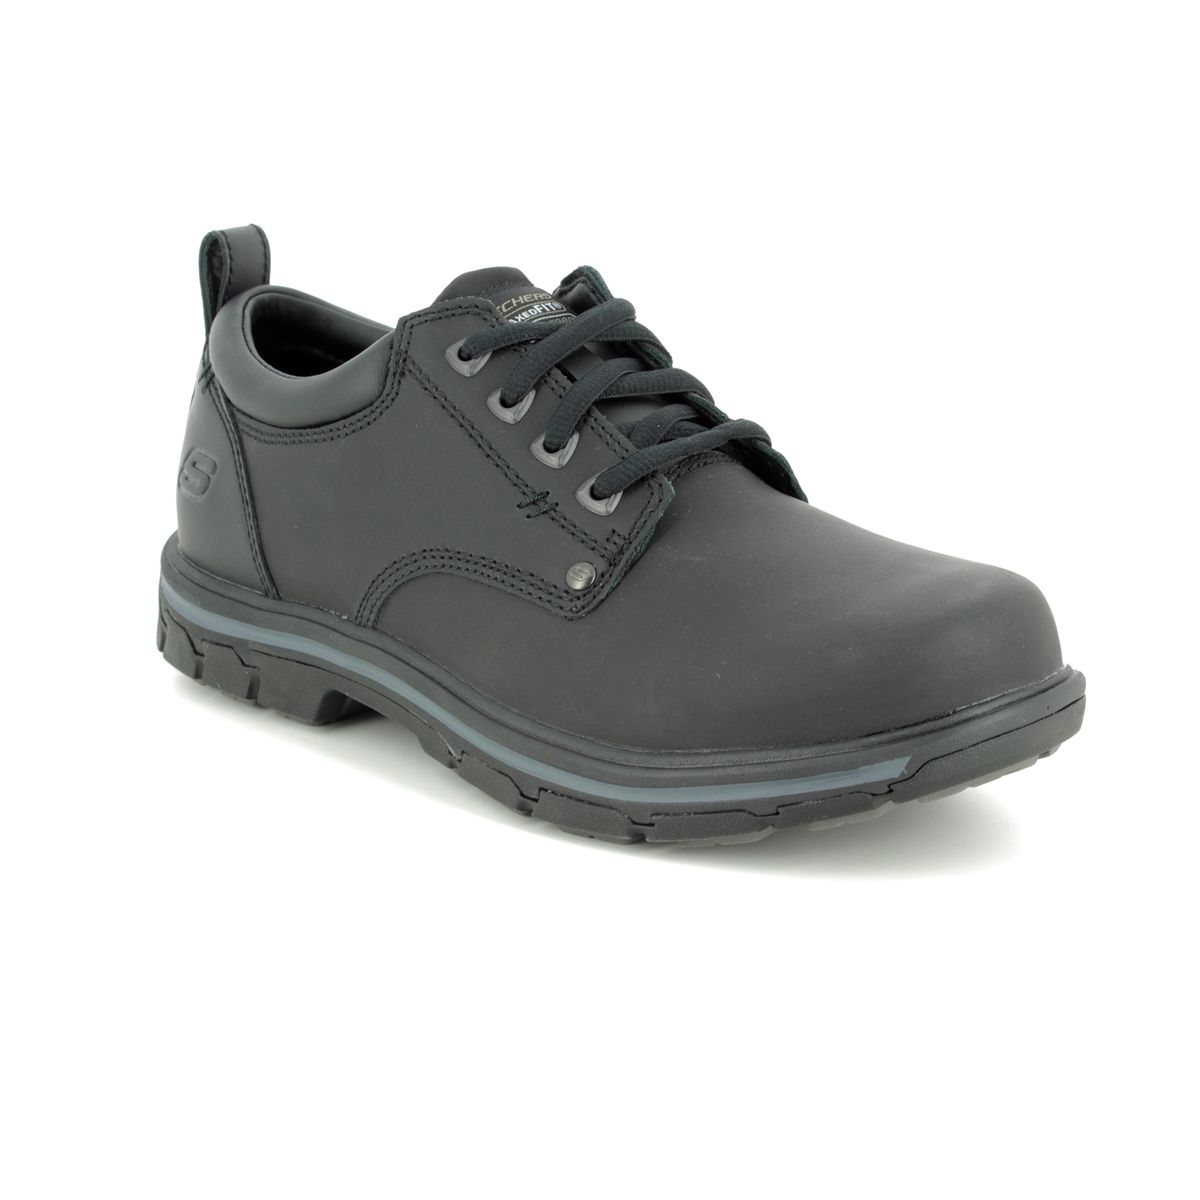 Skechers Segment Rilar Relaxed Fit BLK Black Mens comfort shoes 64260 in a Plain Leather in Size 7